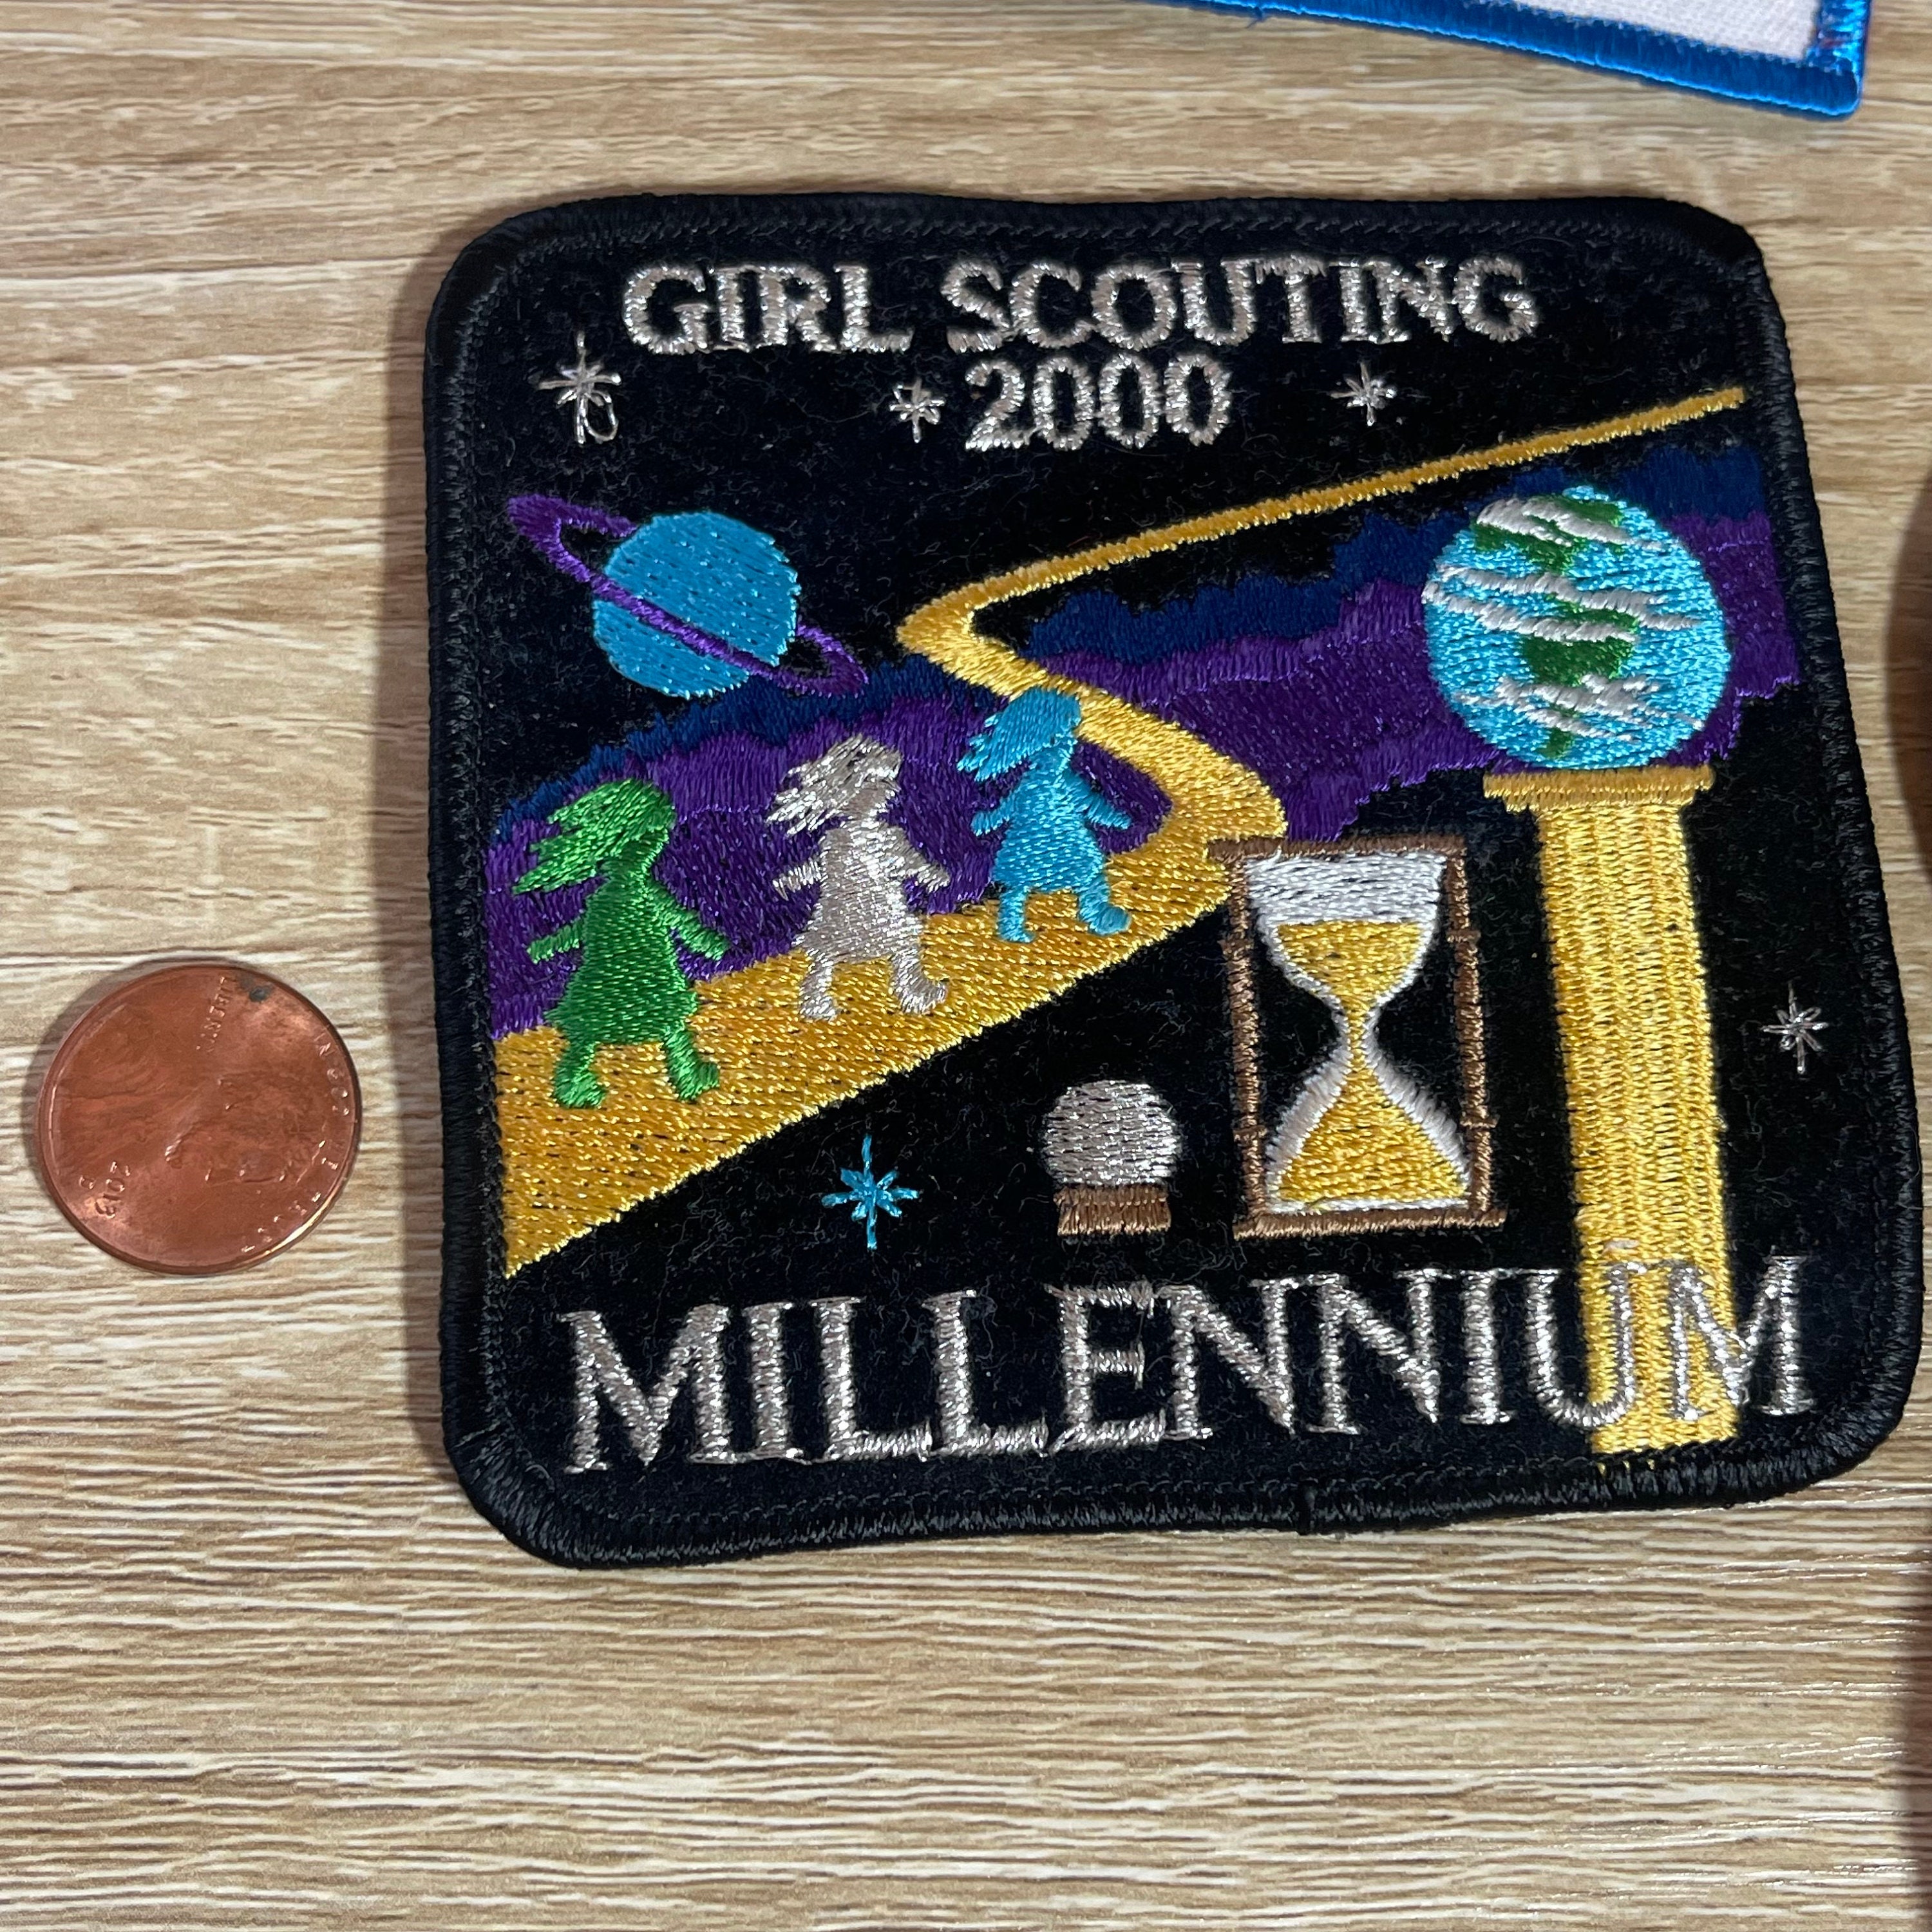 Vintage Girl Scout Patches Scouting Patch You Choose One 90s 2000s